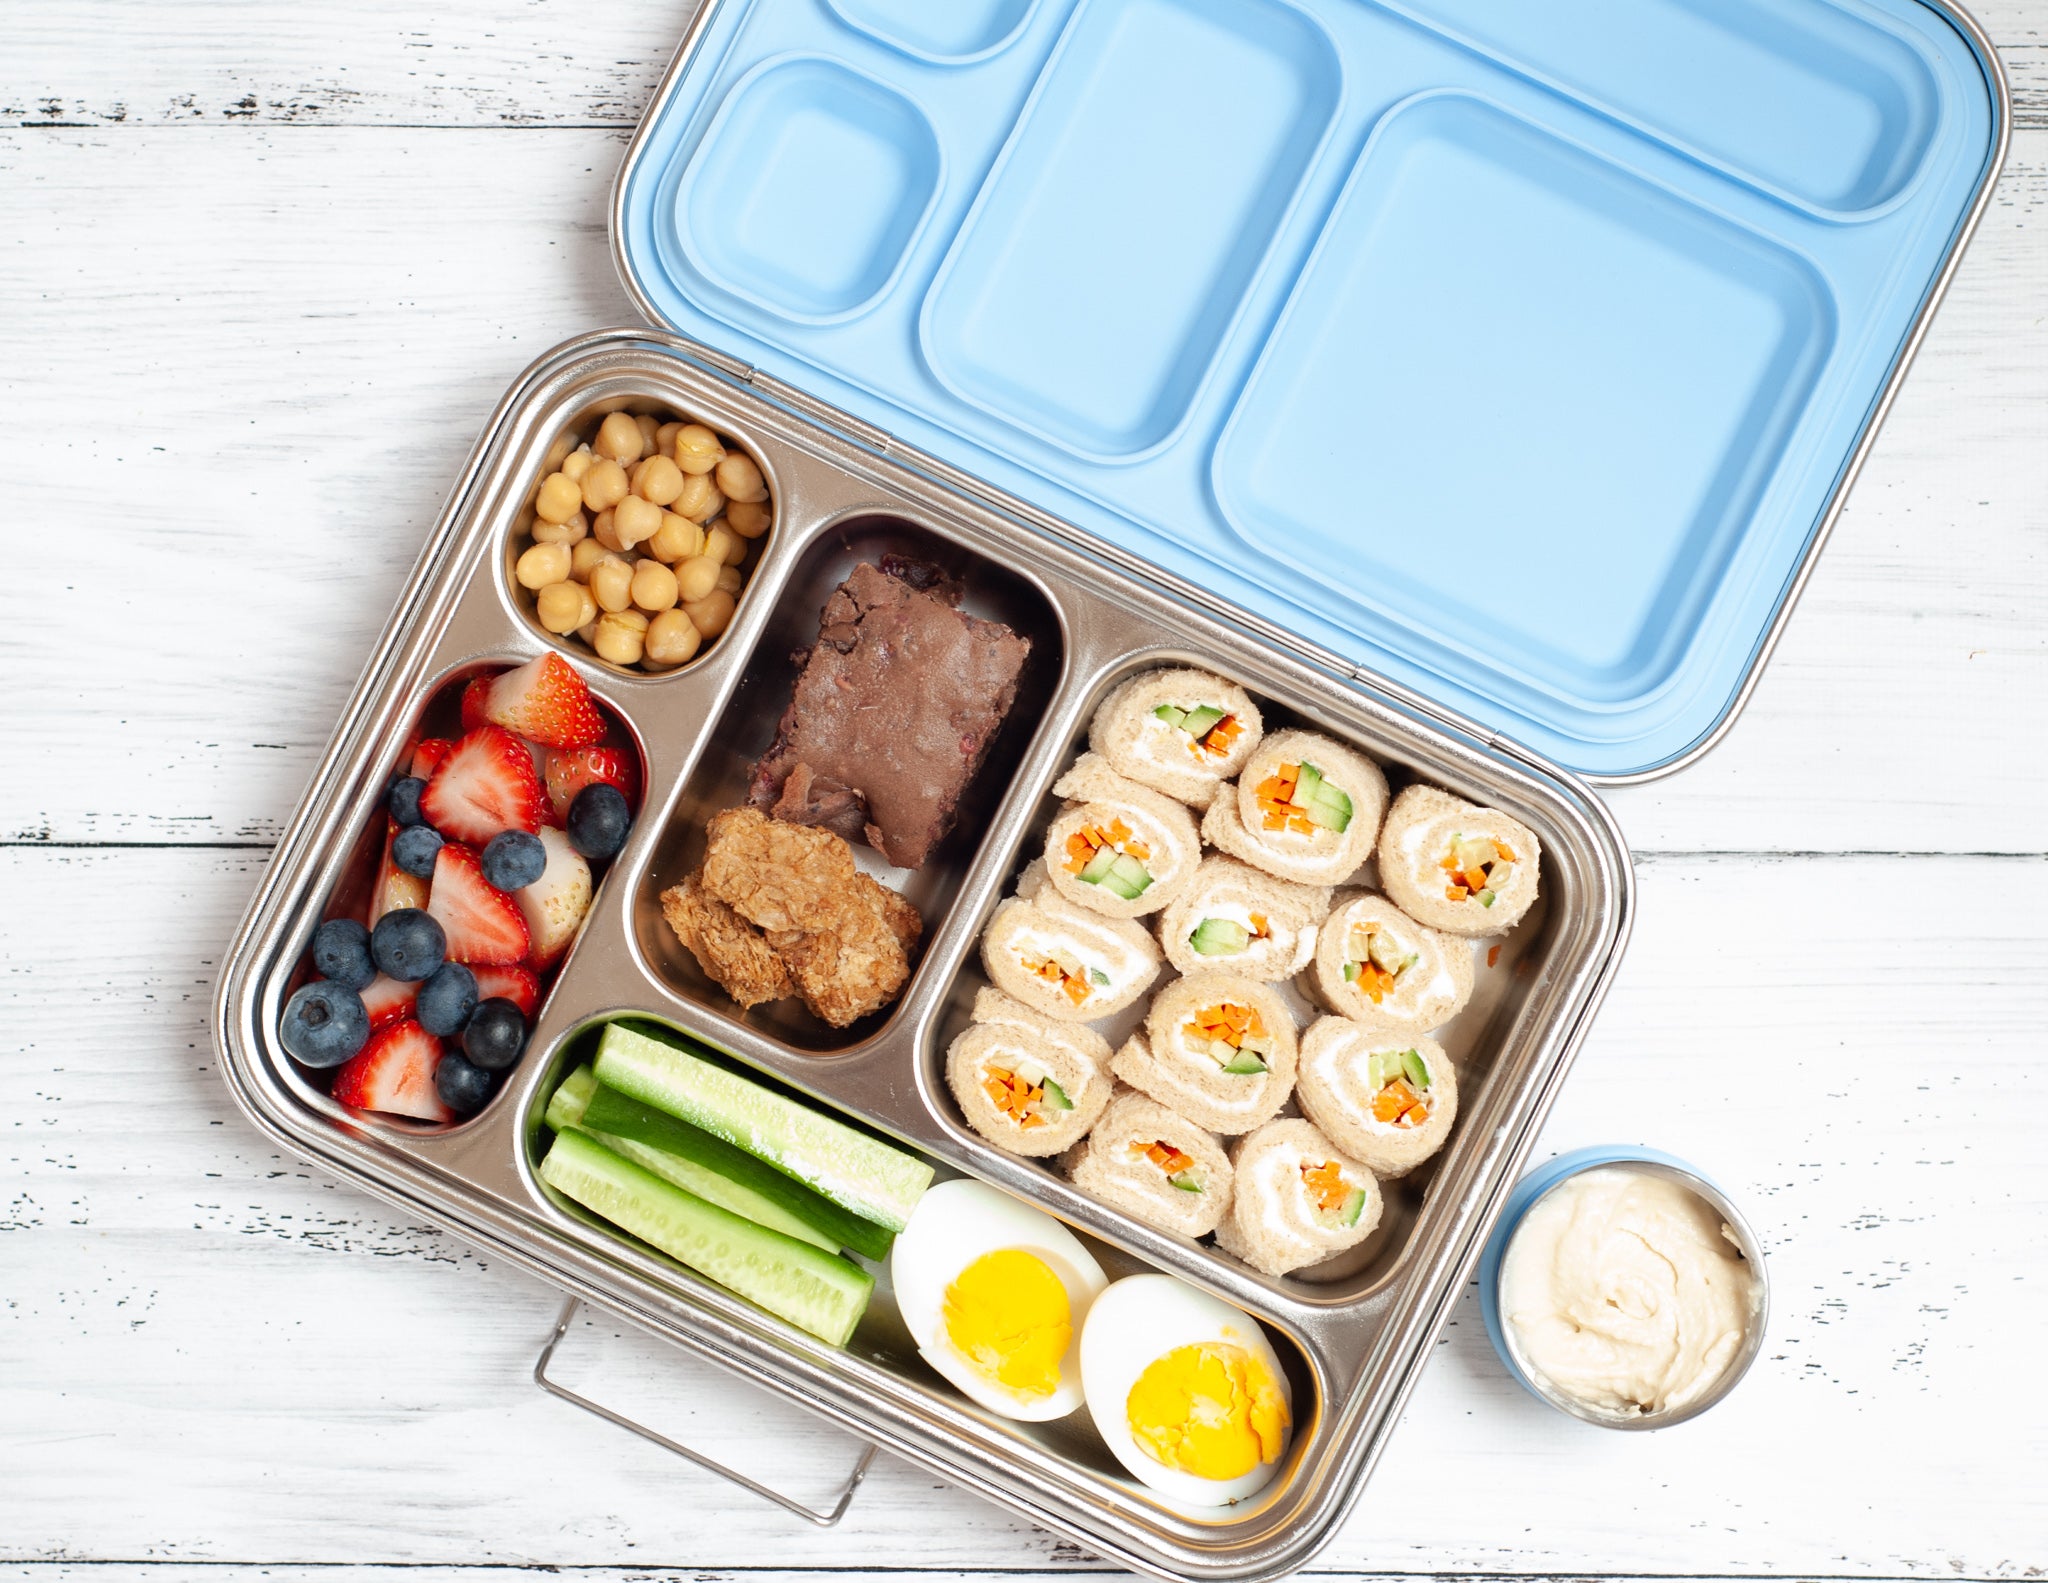 leak proof stainless steel lunch box with pink blue or mint silicone. nudie rudie lunchbox